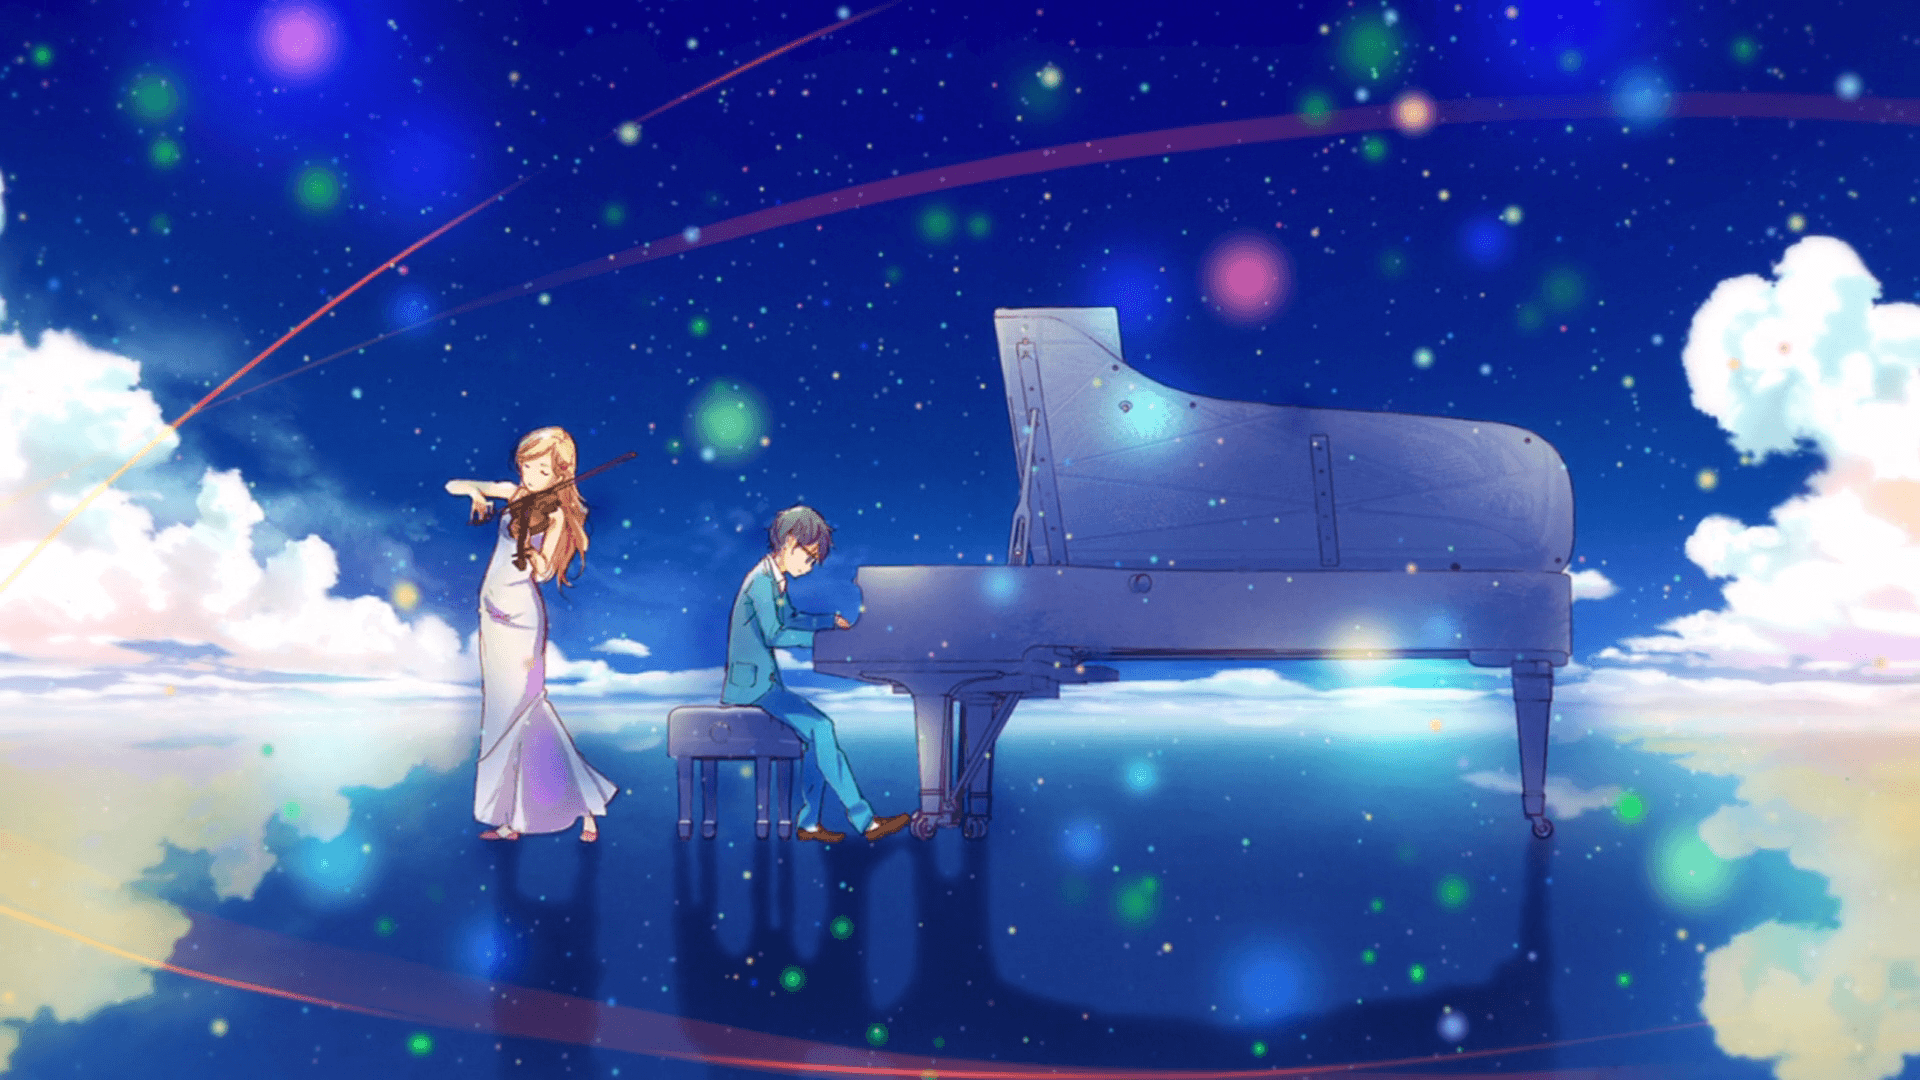 3. "Kousei and Kaori from Your Lie in April" - wide 4